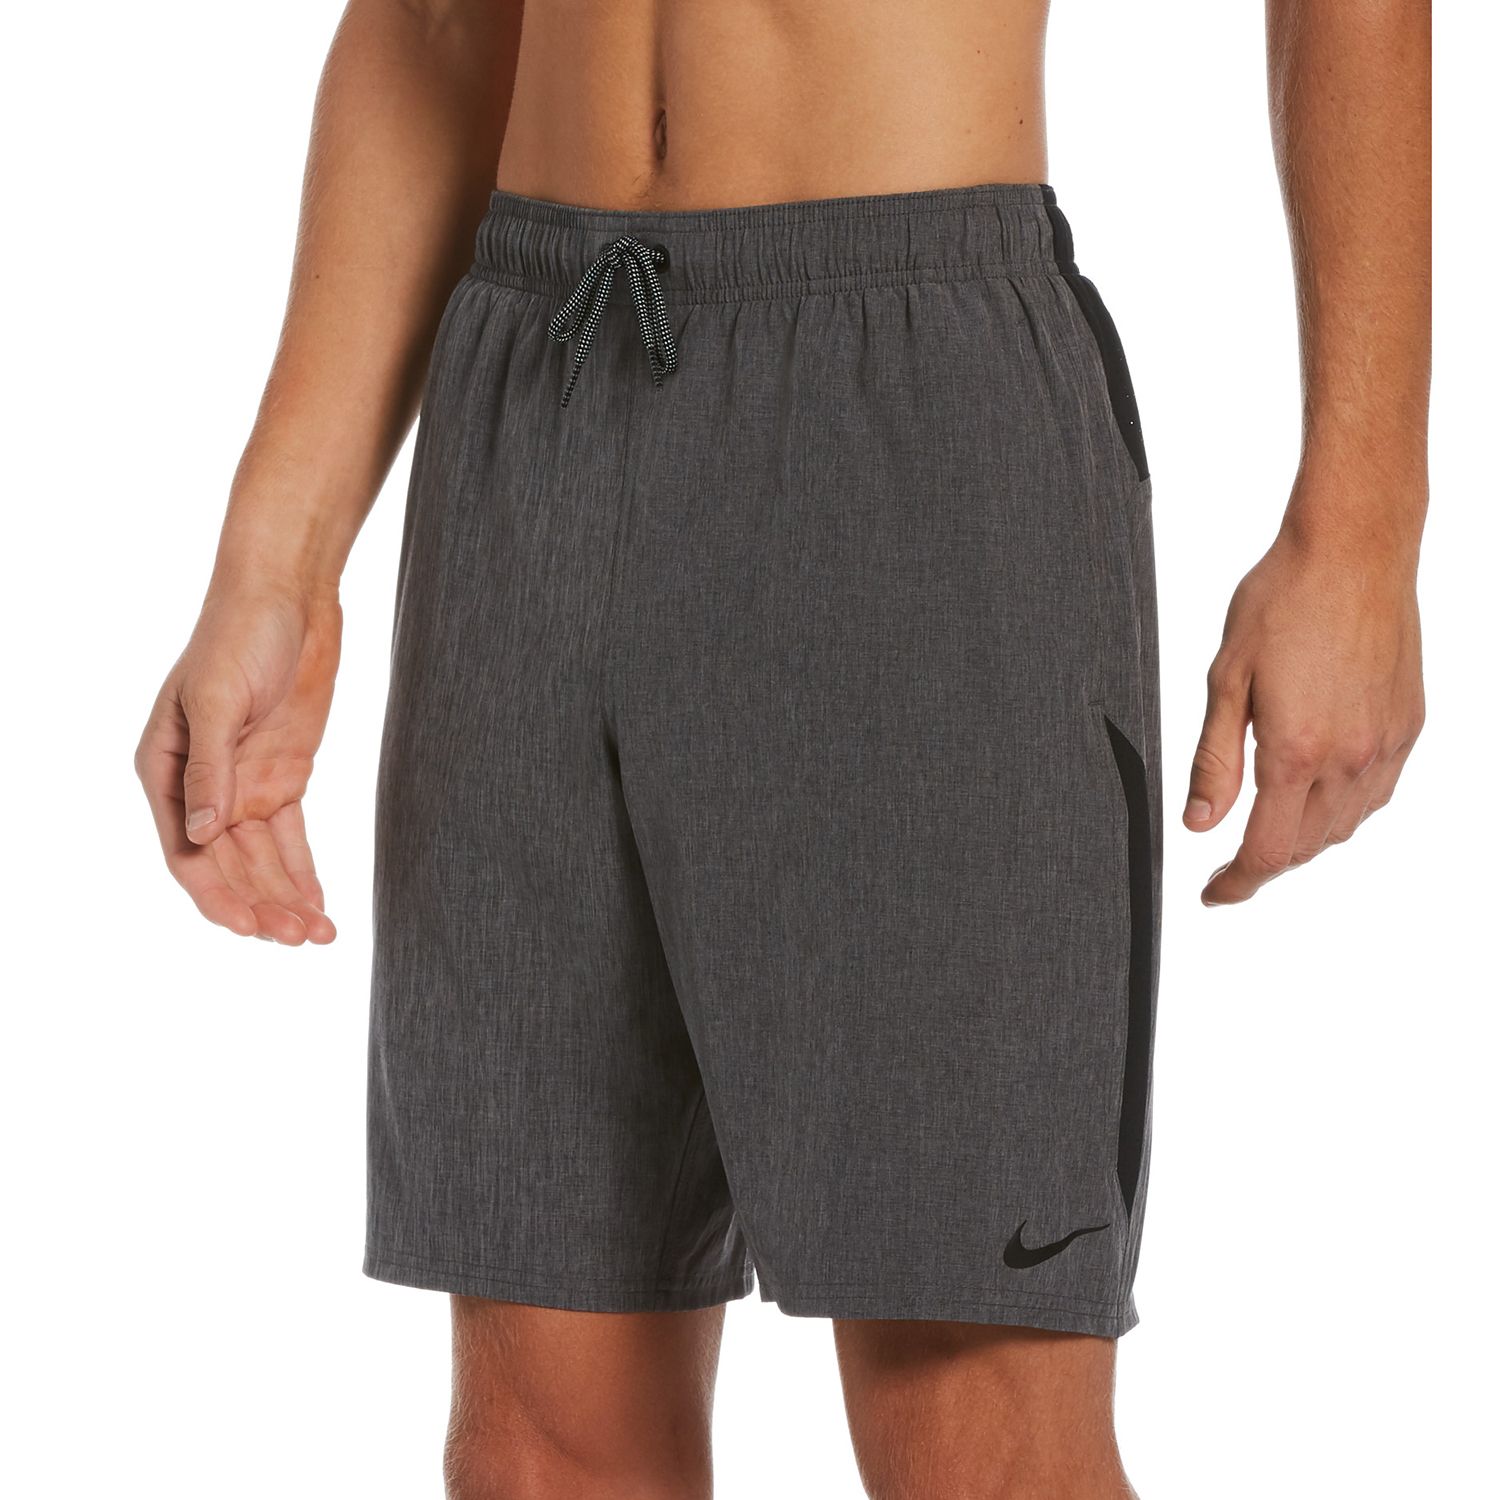 Nike Contend 9-inch Volley Swim Trunks